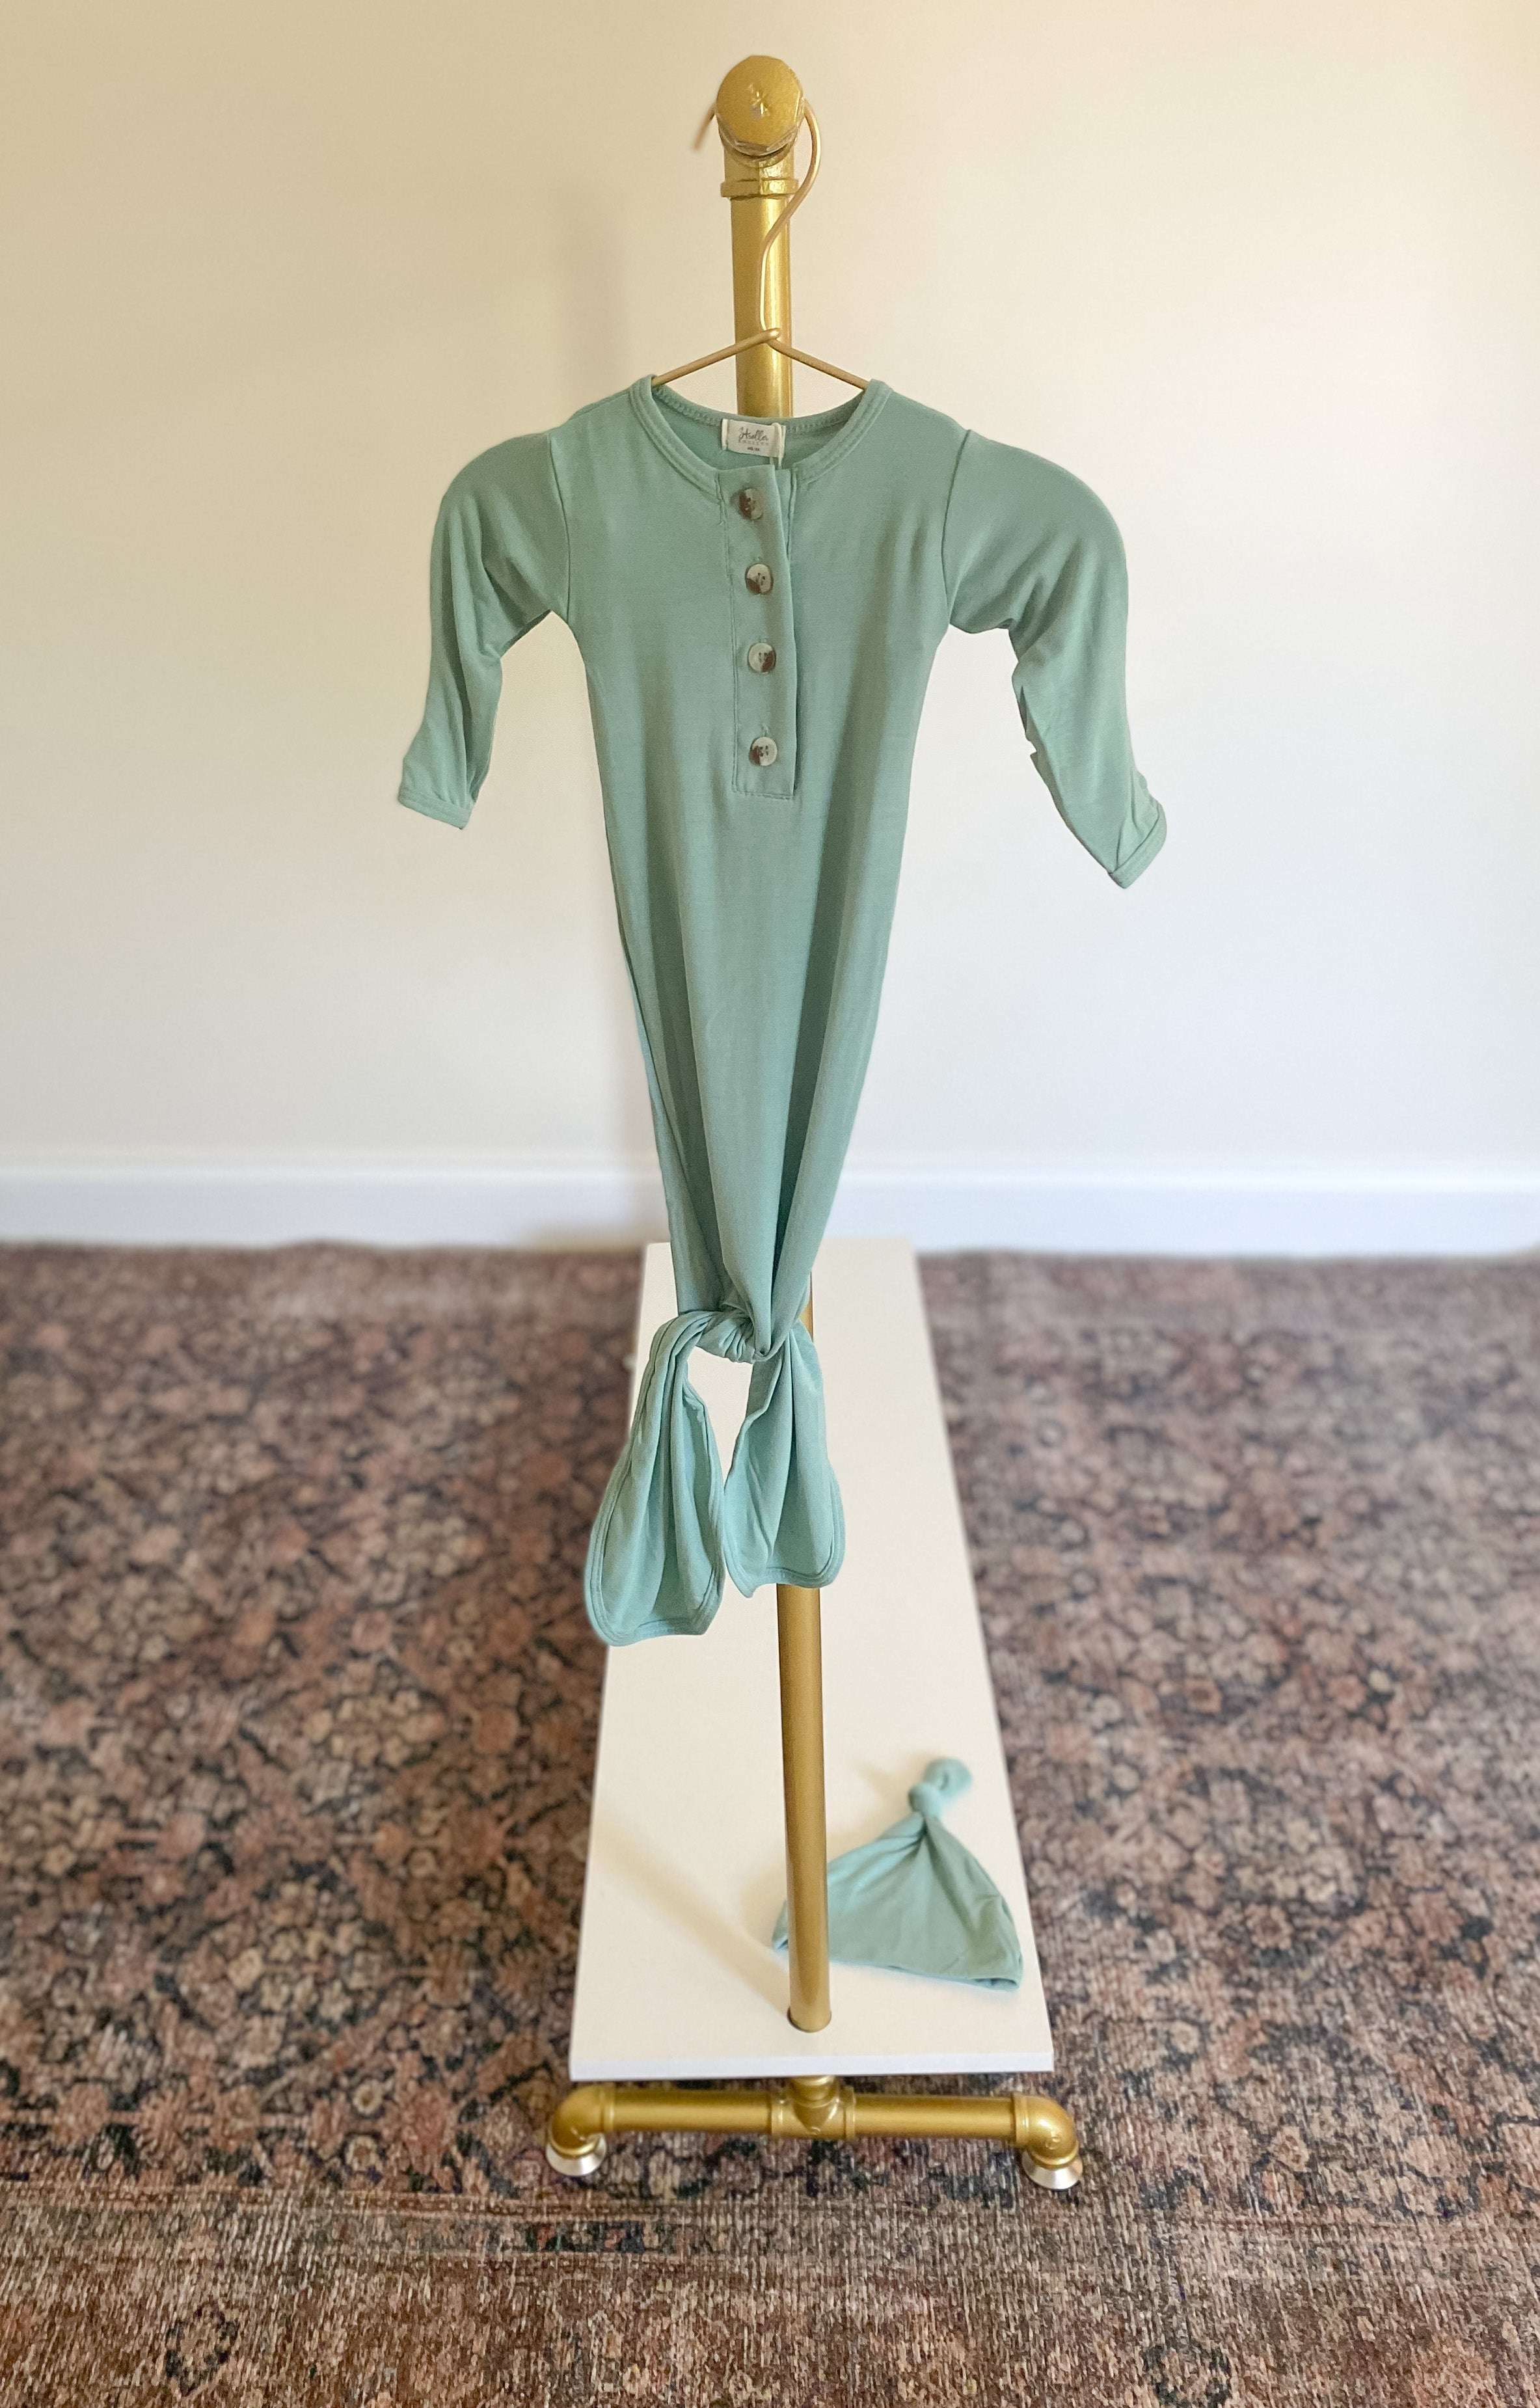 Emerson Knotted Baby Gown Set | Mint Milk & Baby